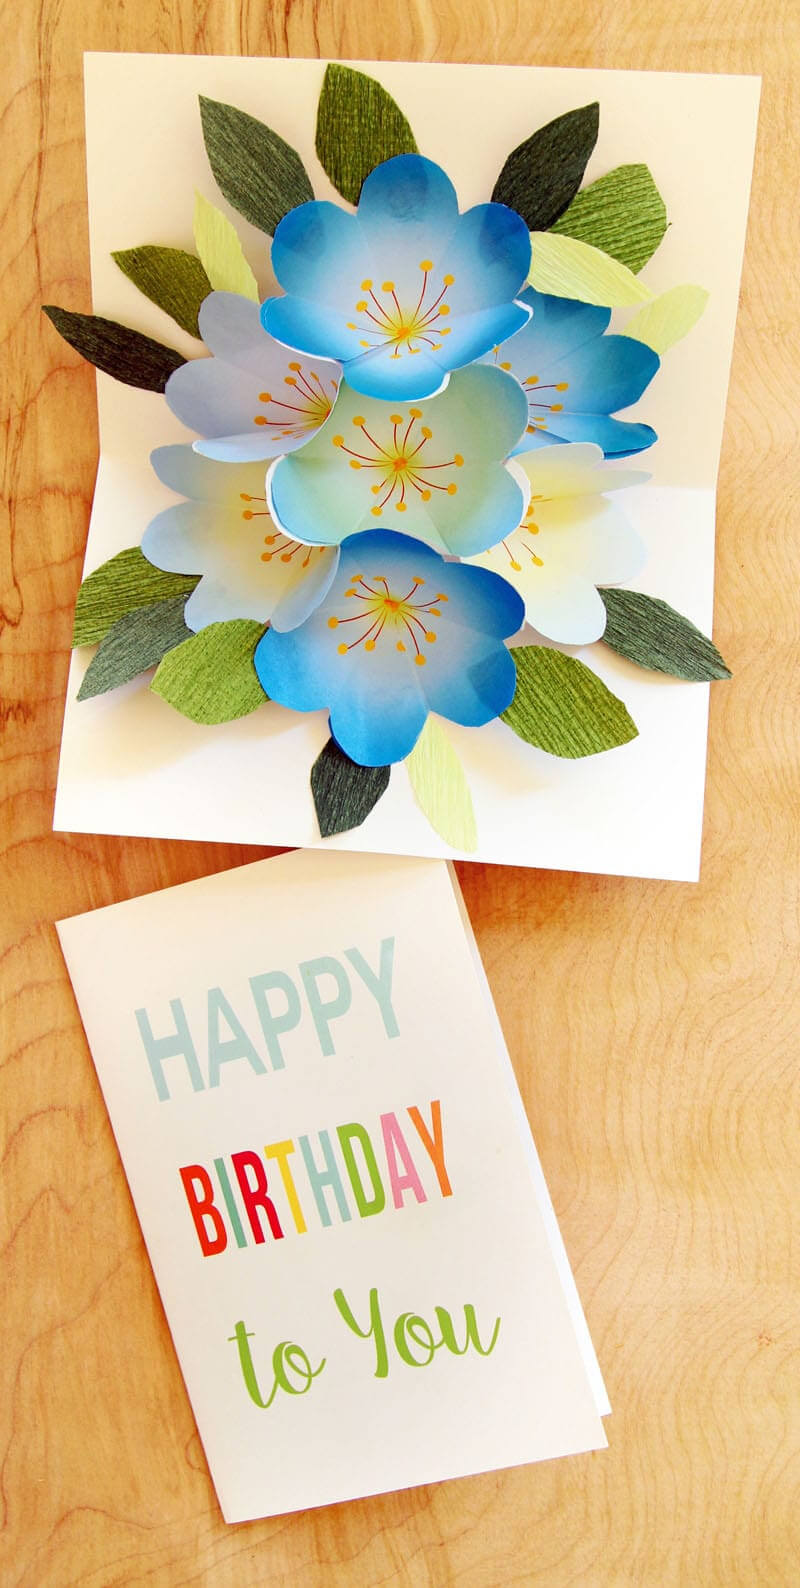 Free Printable Happy Birthday Card With Pop Up Bouquet – A With Regard To Pop Up Card Templates Free Printable